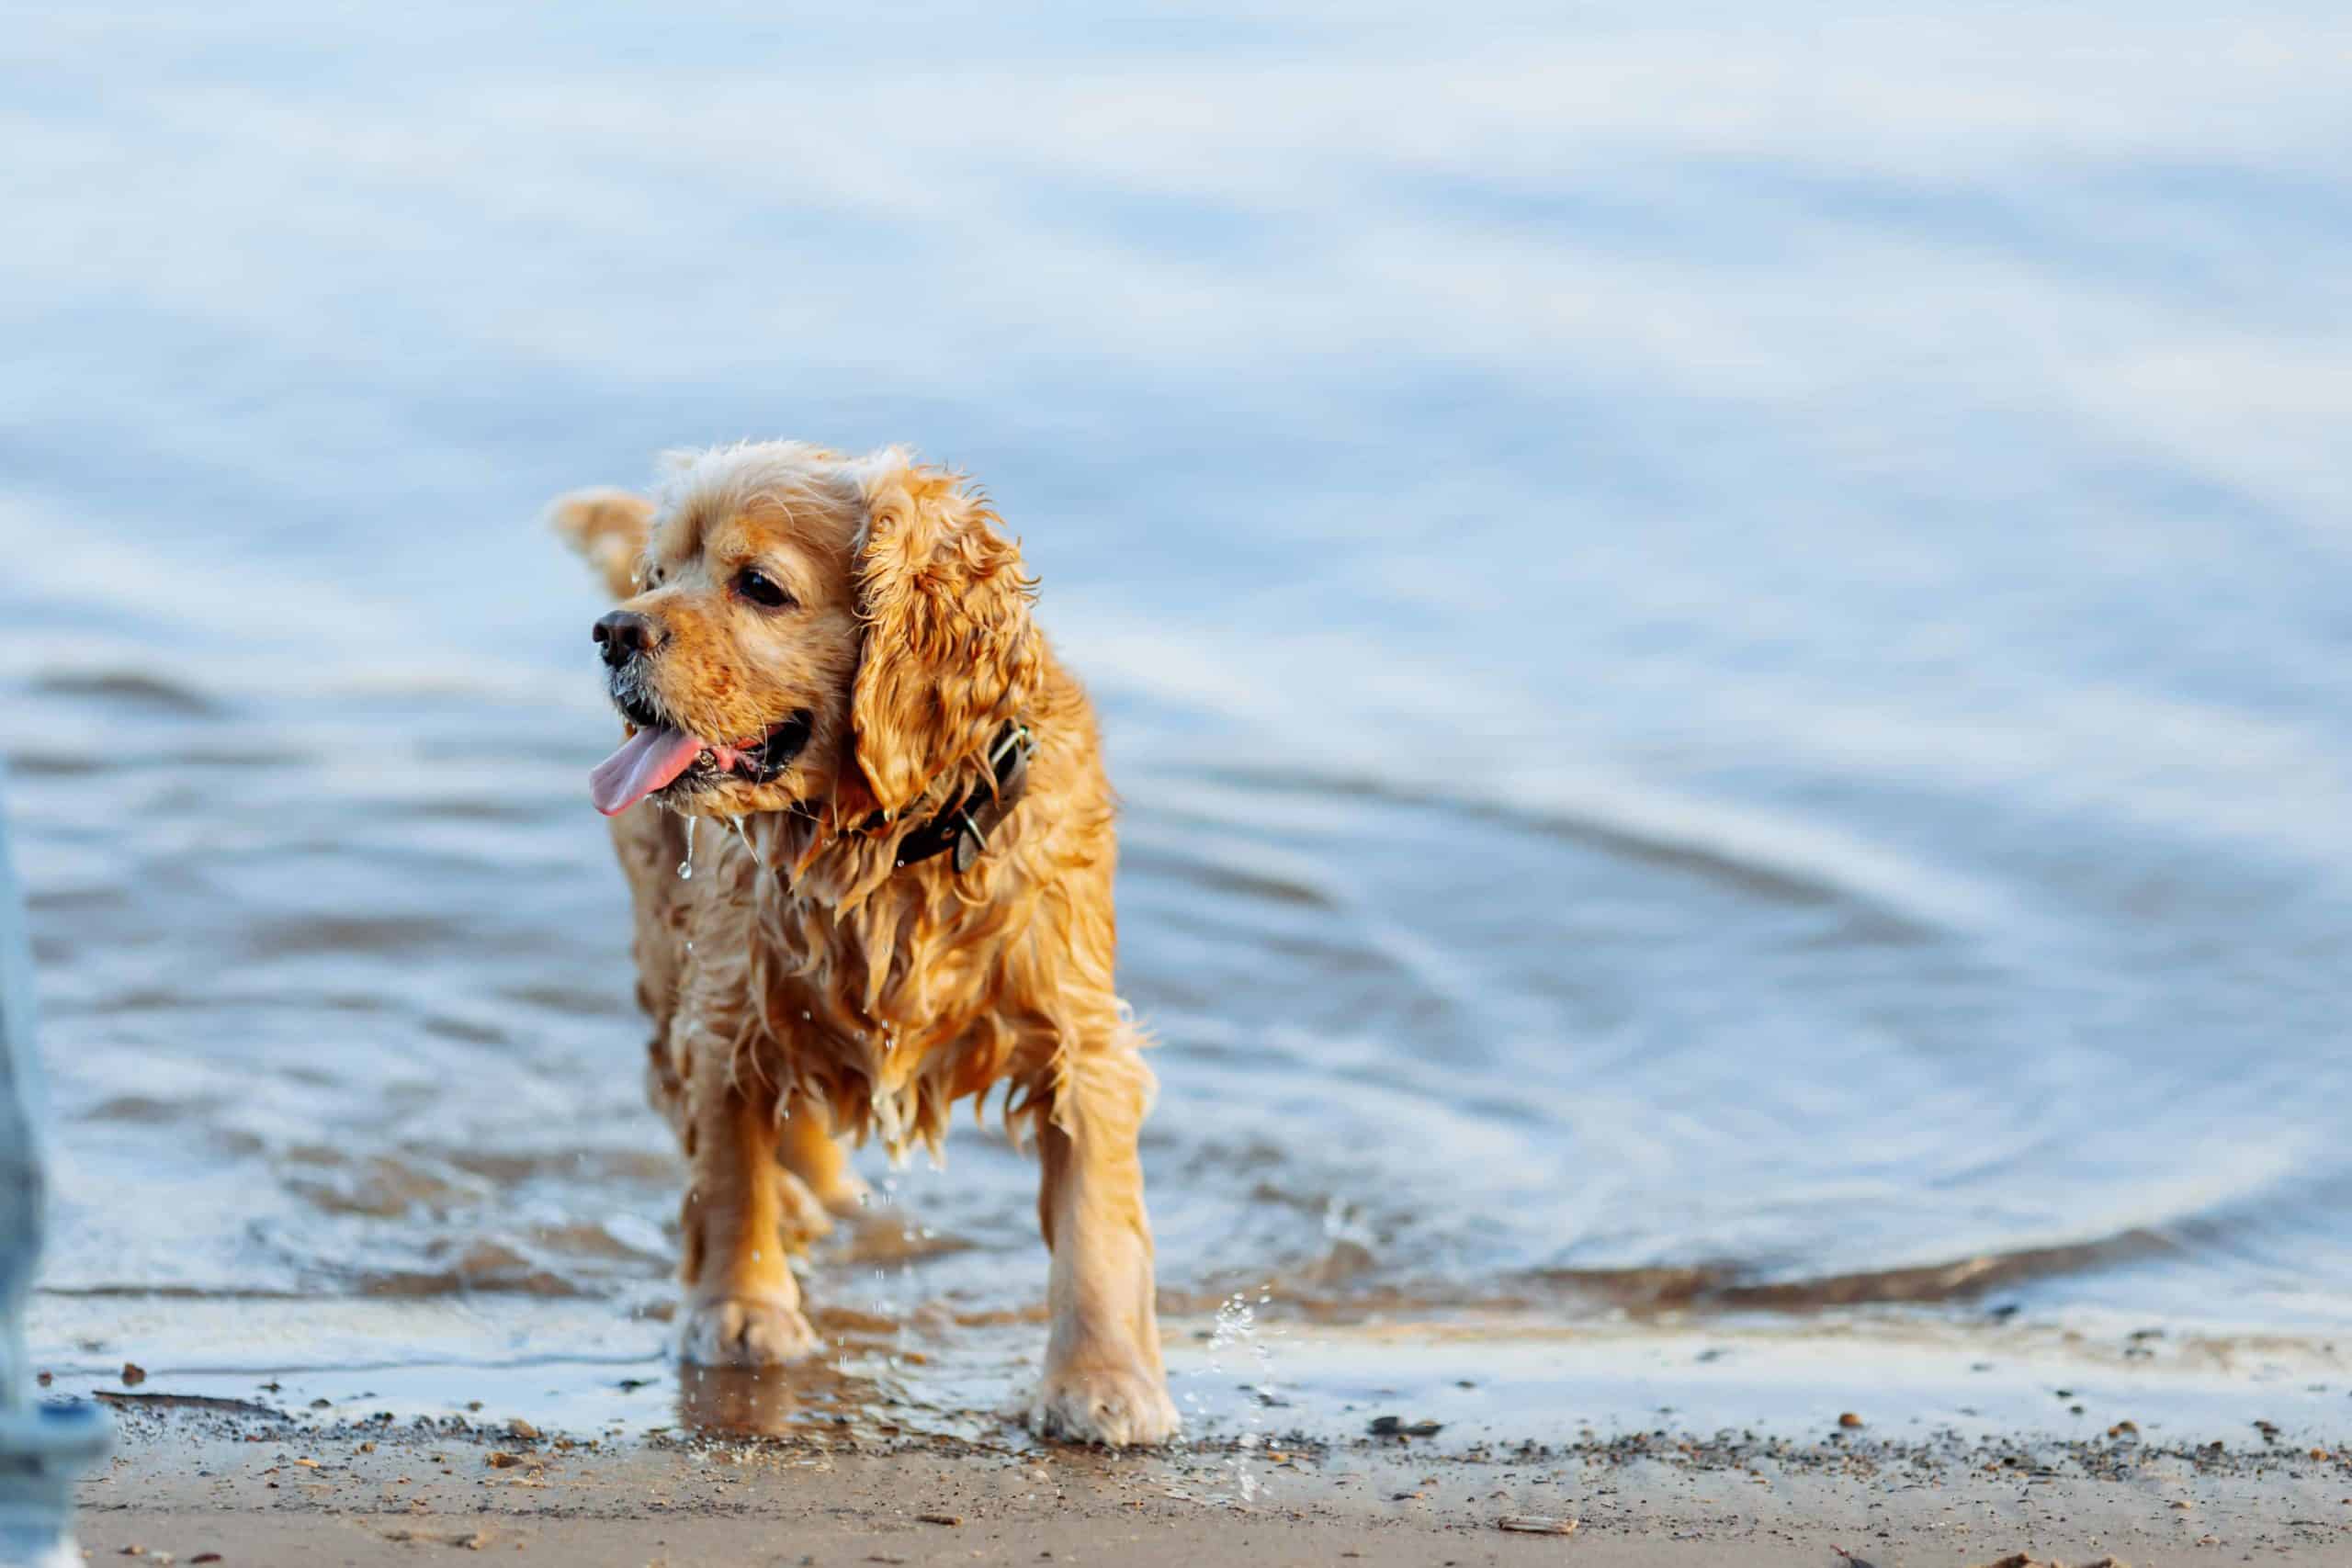 American Water Spaniel plays on the beach. Choose a dog breed that can handle heat and humidity like an American Water Spaniel, Afghan Hound, or Chihuahua.